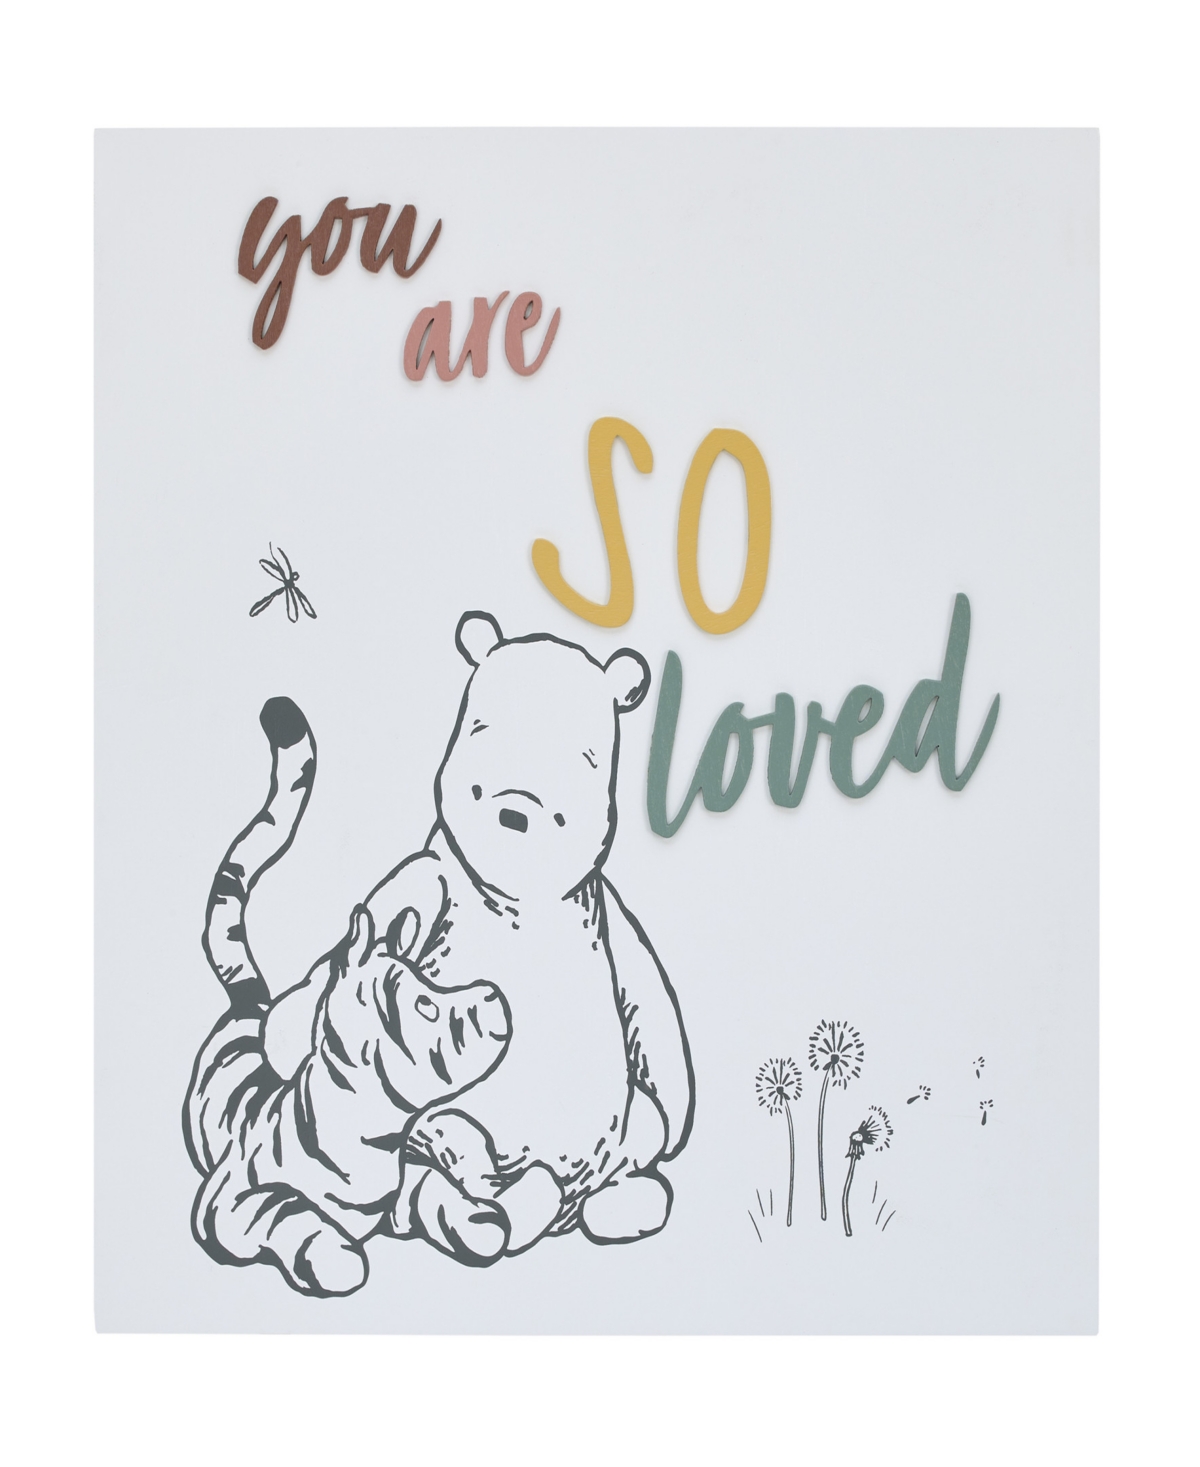 Disney Classic Winnie The Pooh and Tigger 'You Are So Loved' Wood Wall Decor, 14" x 14" Bedding